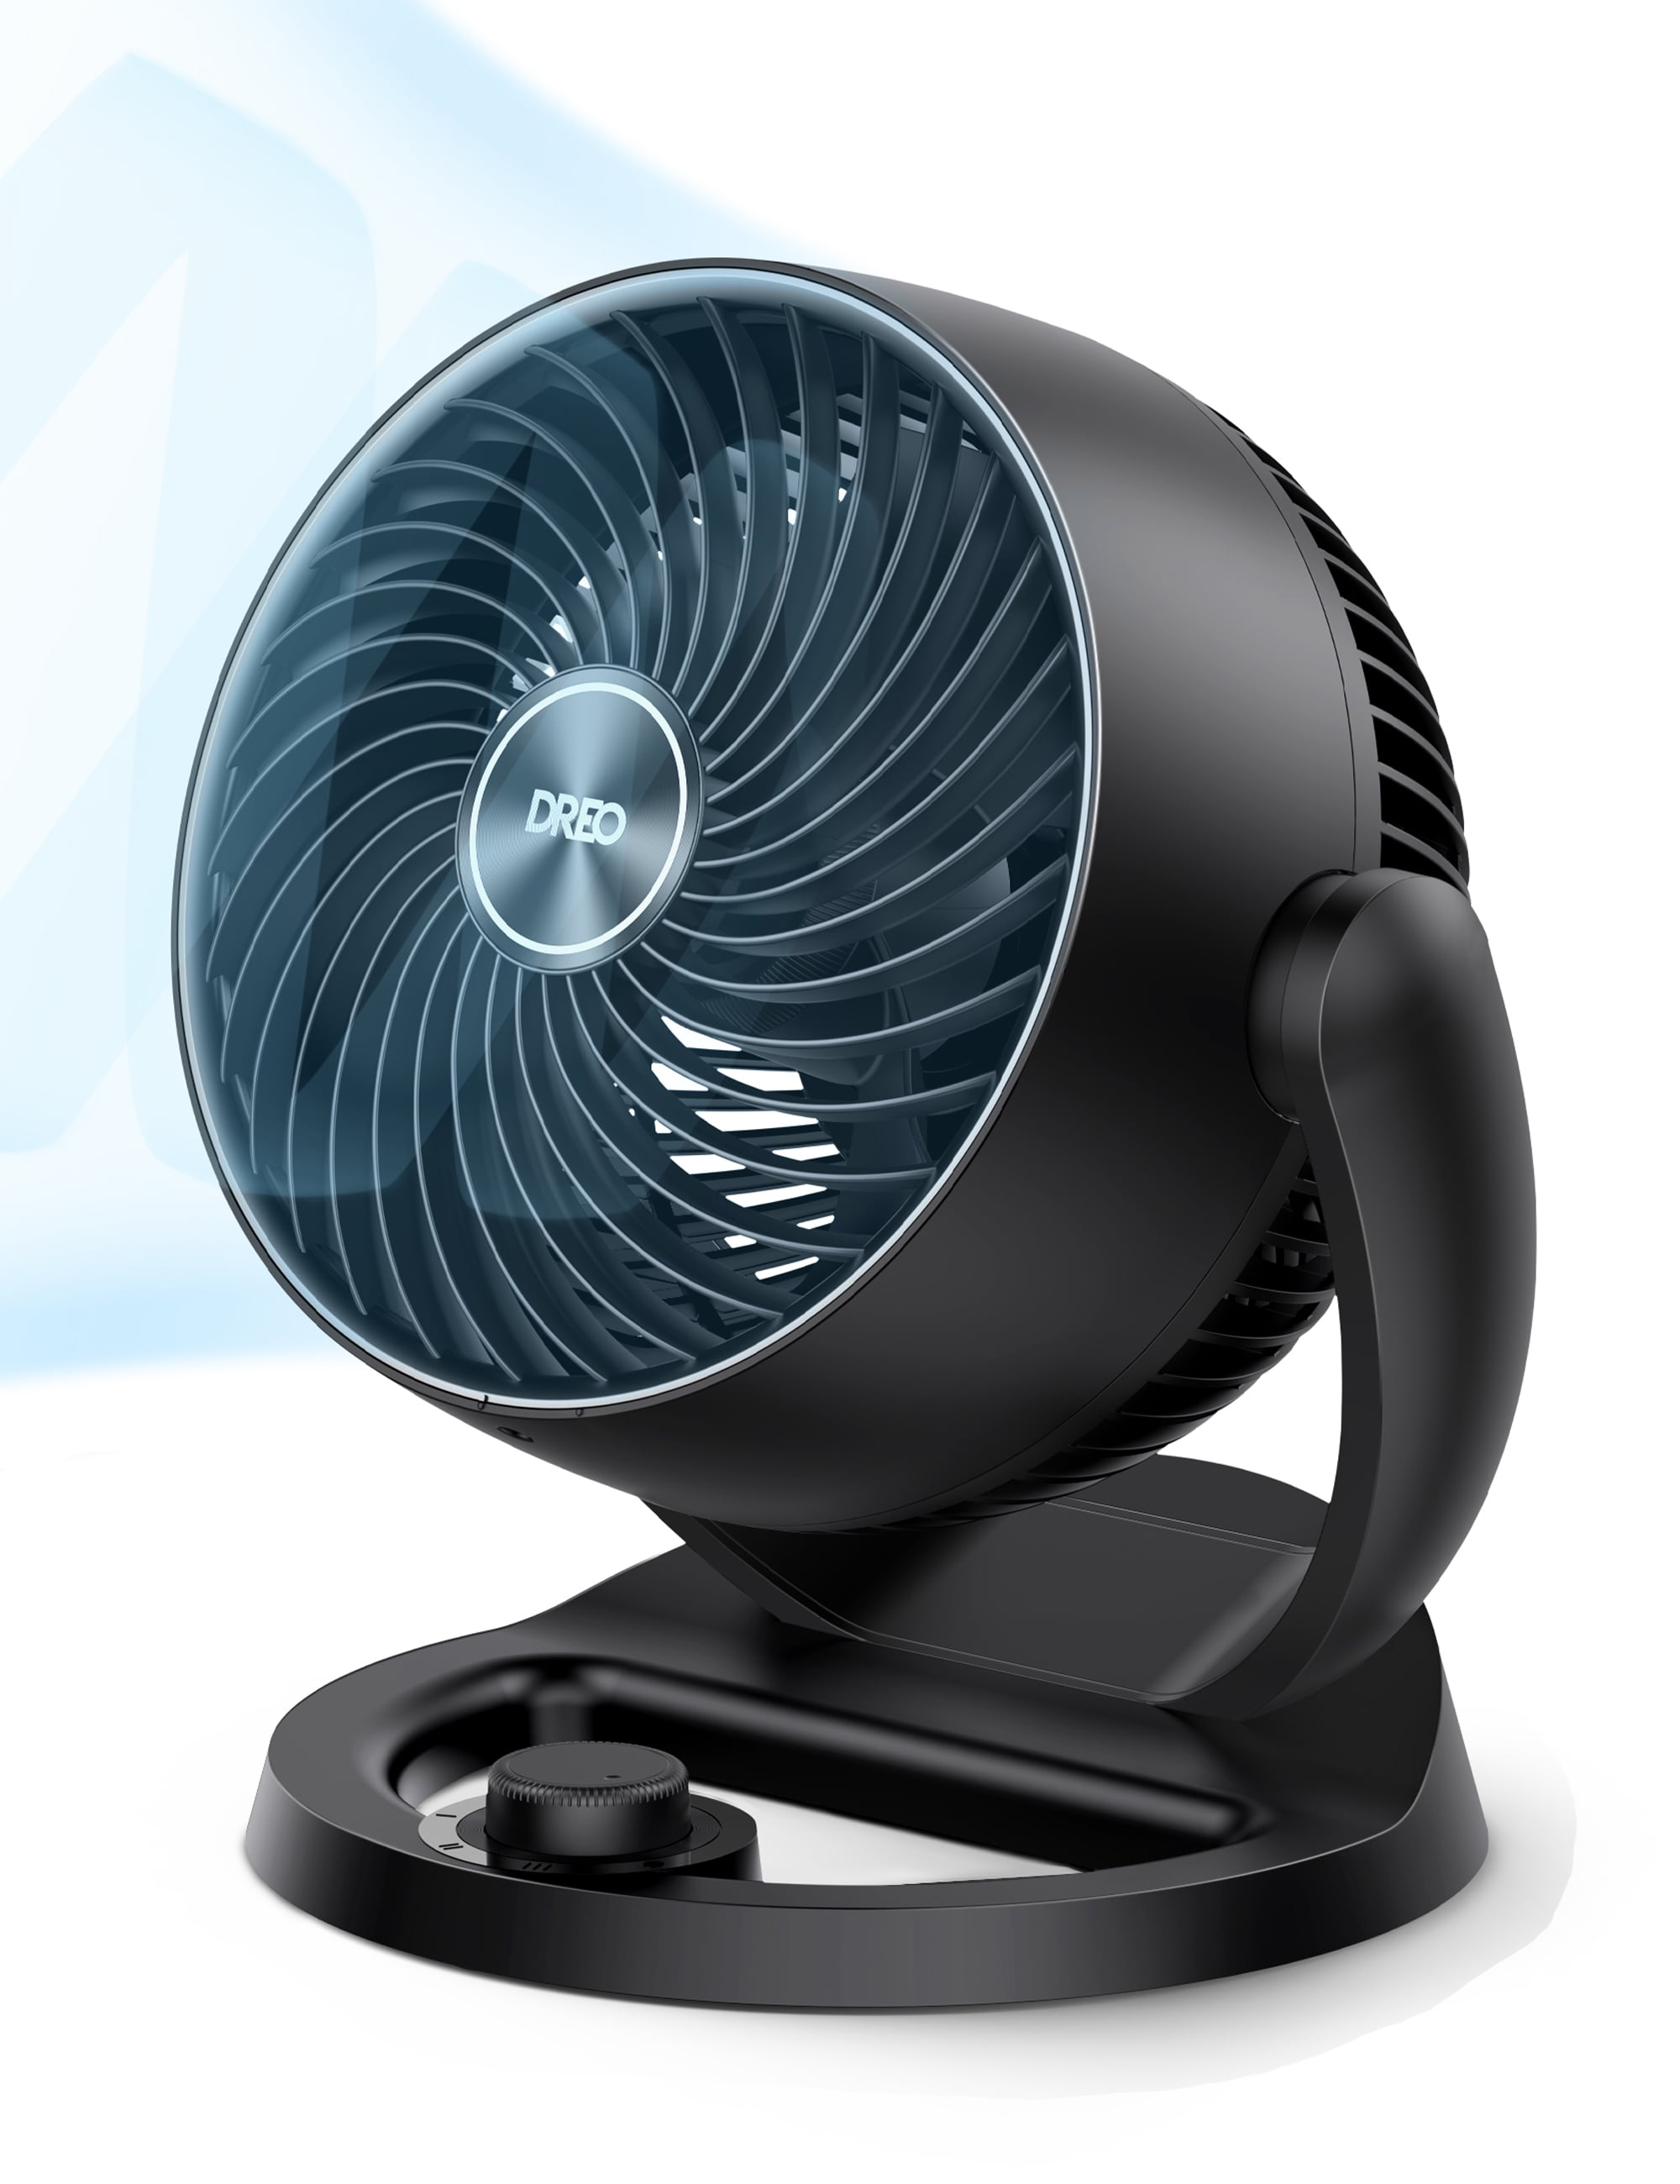 Dreo Desk Fans for Home, Whole Room Air Circulator Fan, 70ft